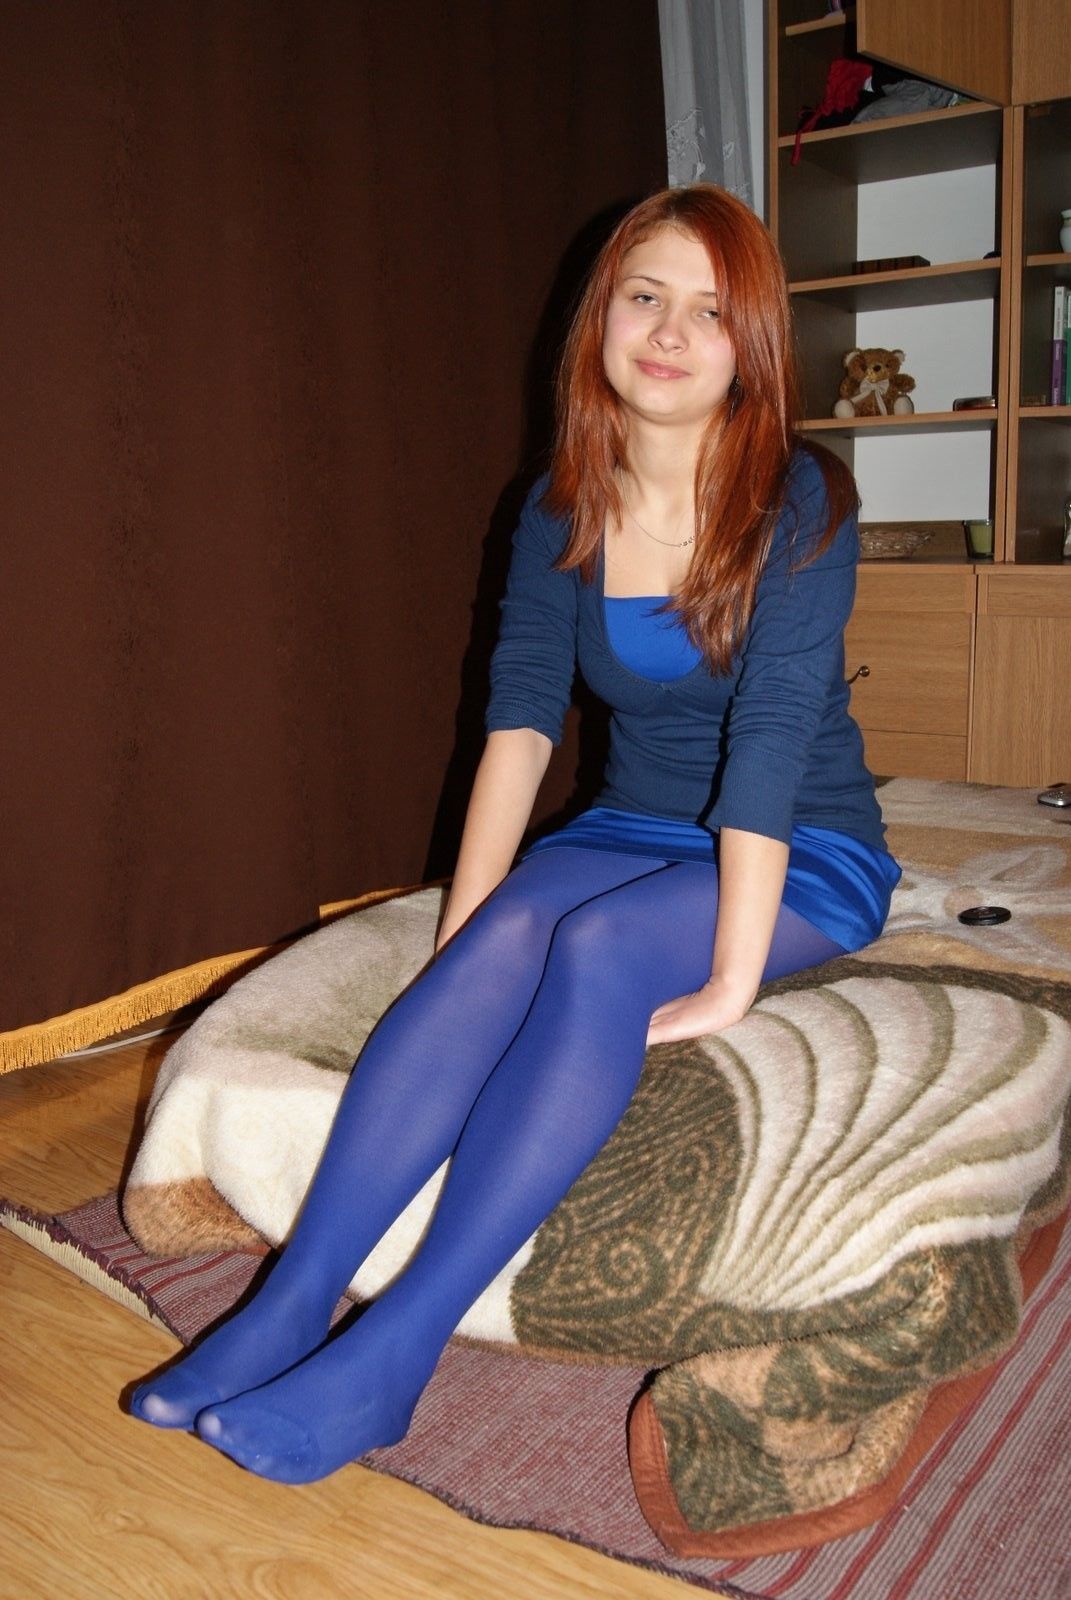 Women S Legs And Feet In Tights Legs And Feet In Blue Tights